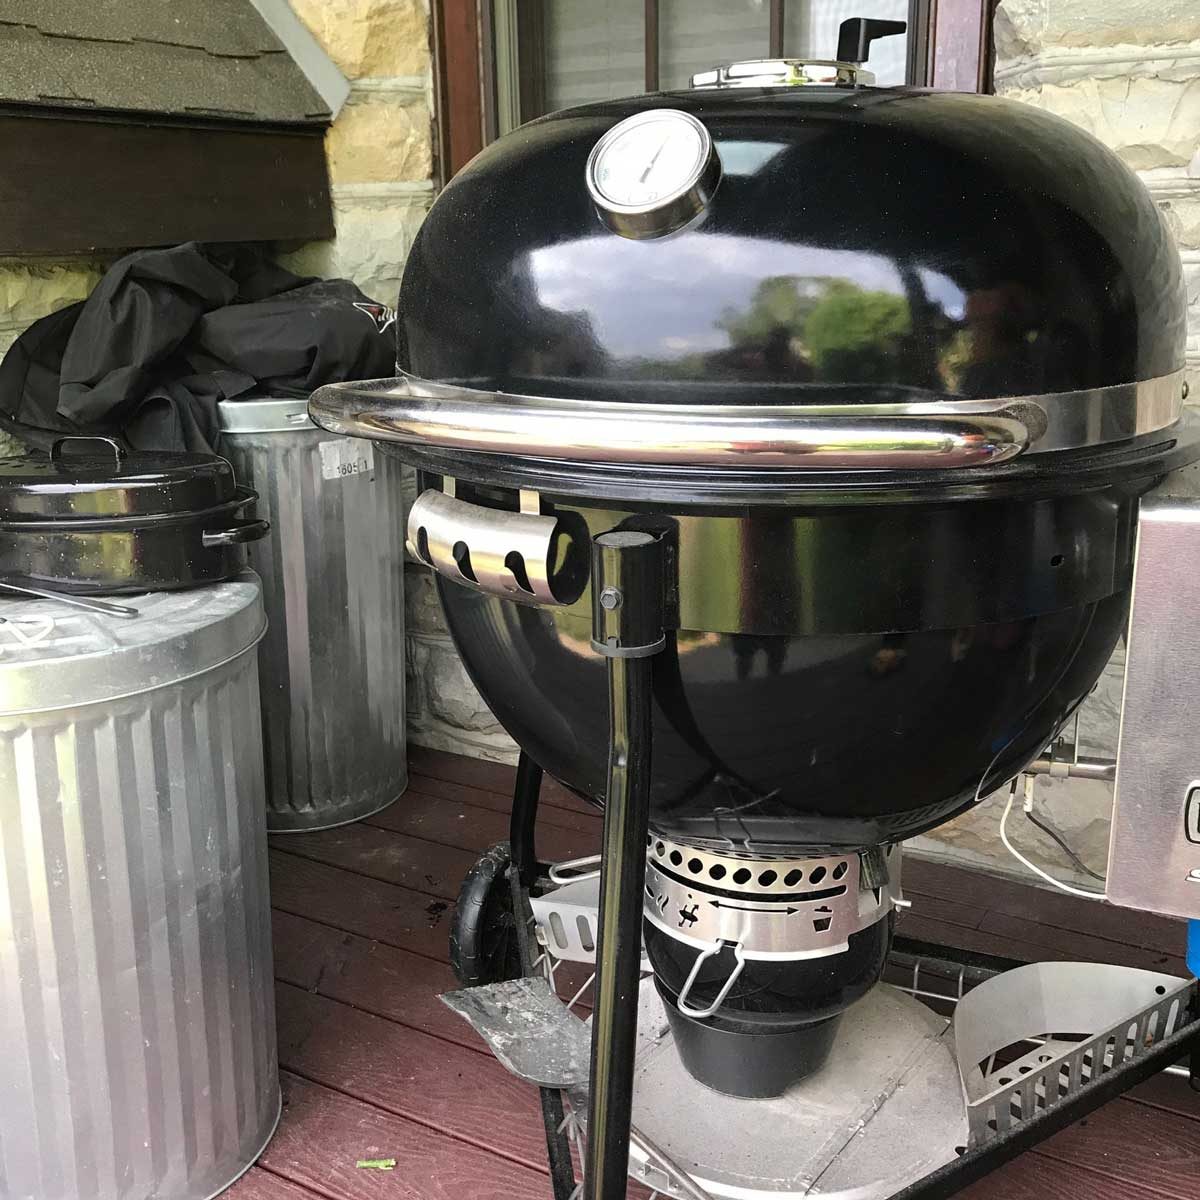 How to Use a Charcoal Grill for the First Time